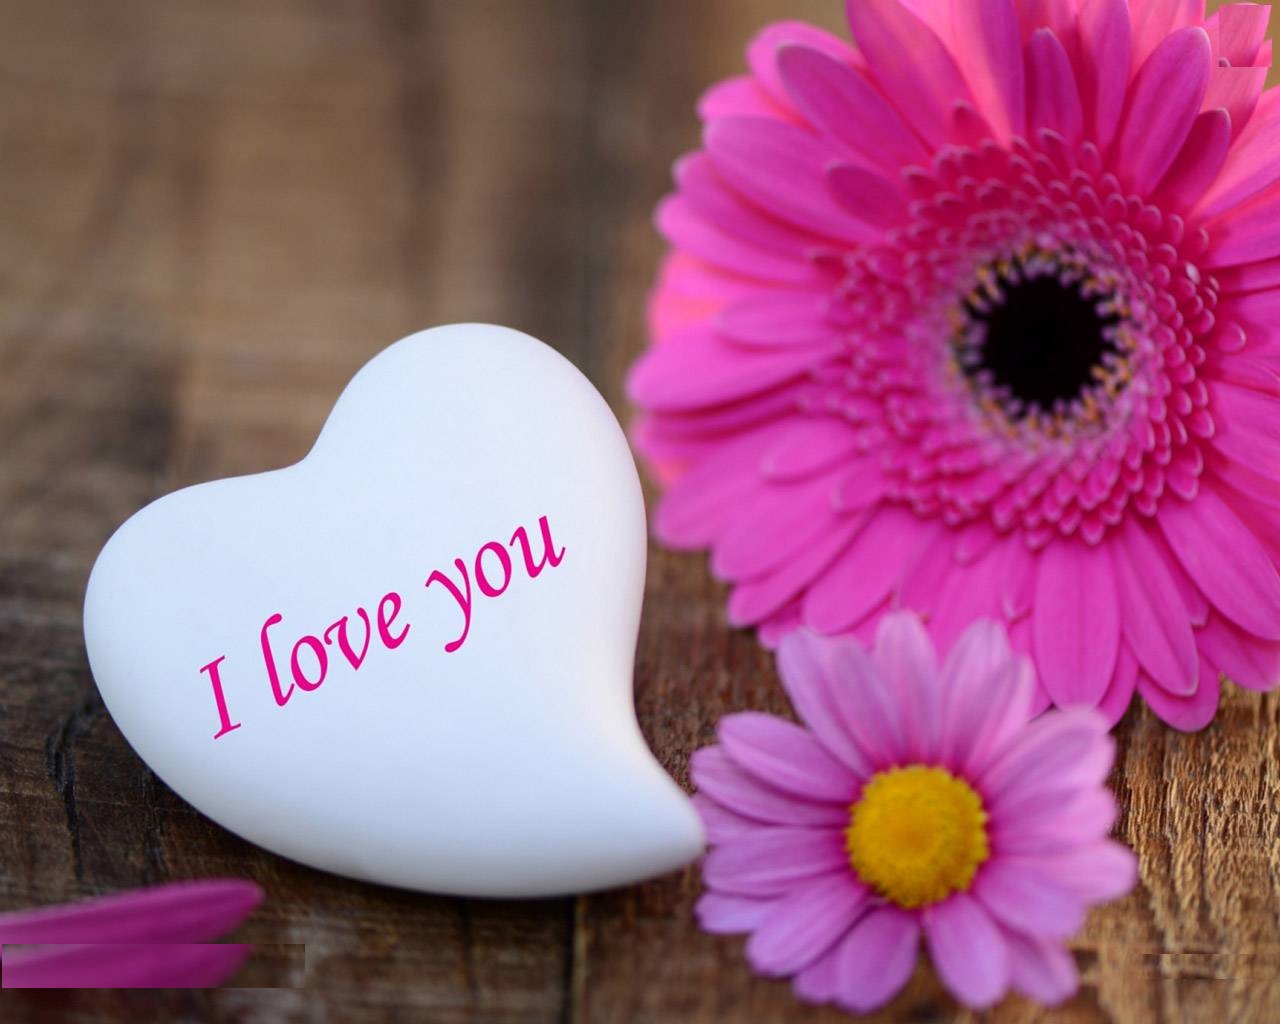 Free download love pictures wallpapers for all | Beautiful Images ...